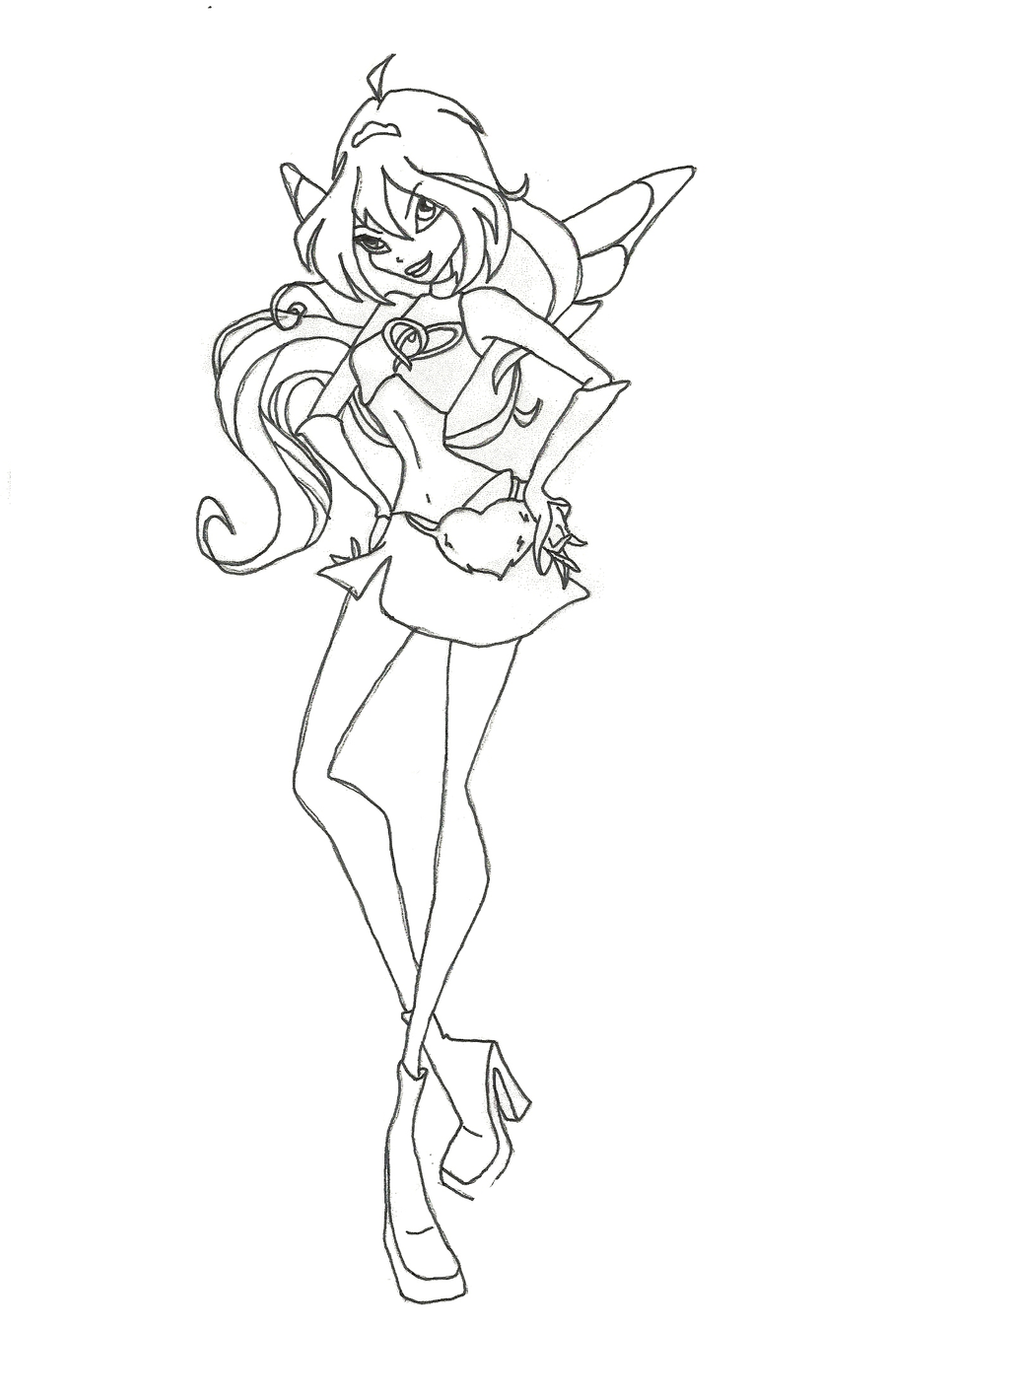 Winx Club Charmix Bloom coloring page by winxmagic237 on DeviantArt